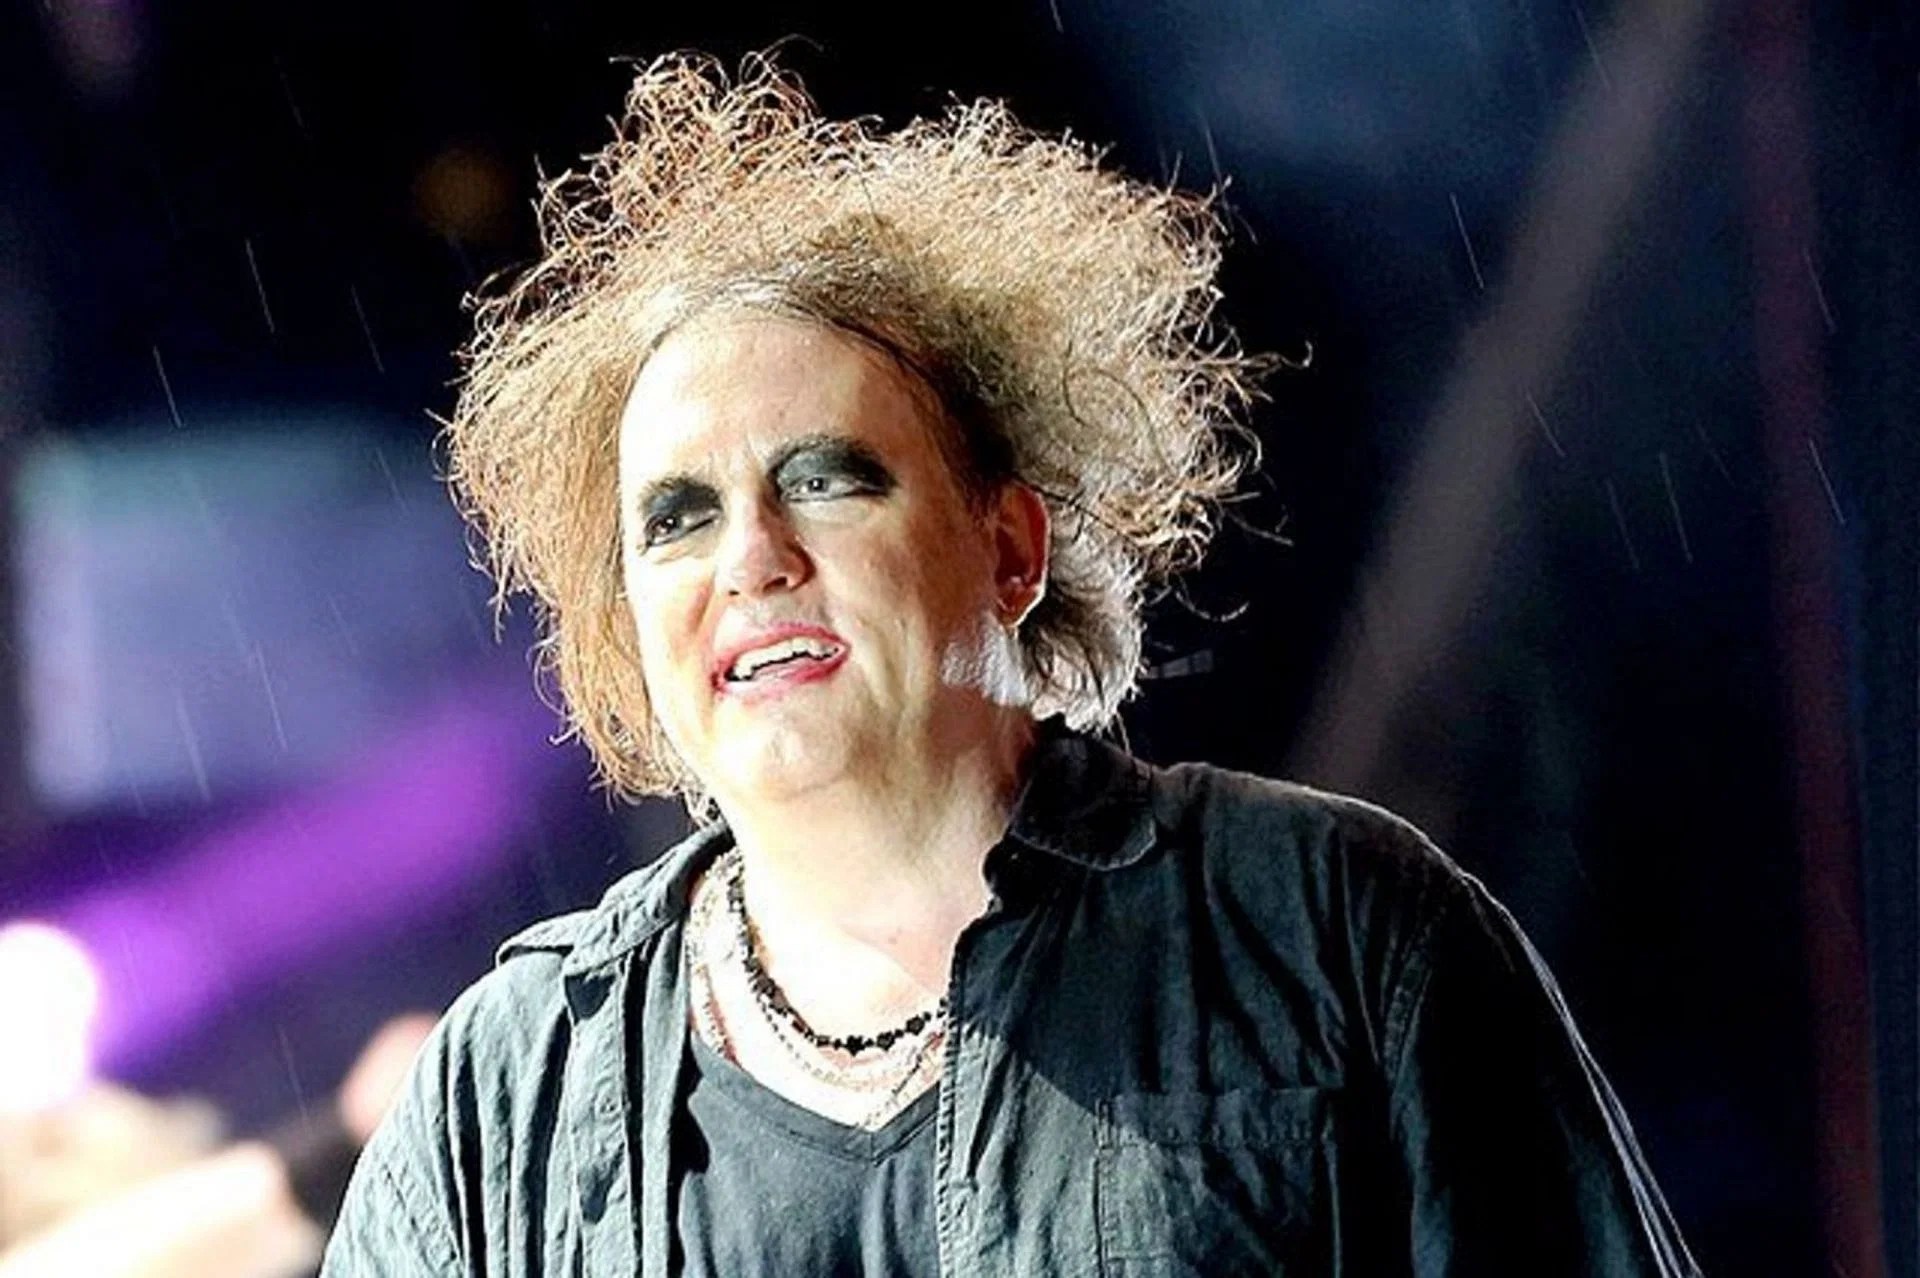 What did Robert Smith do? Grooming allegations explored as disbelief